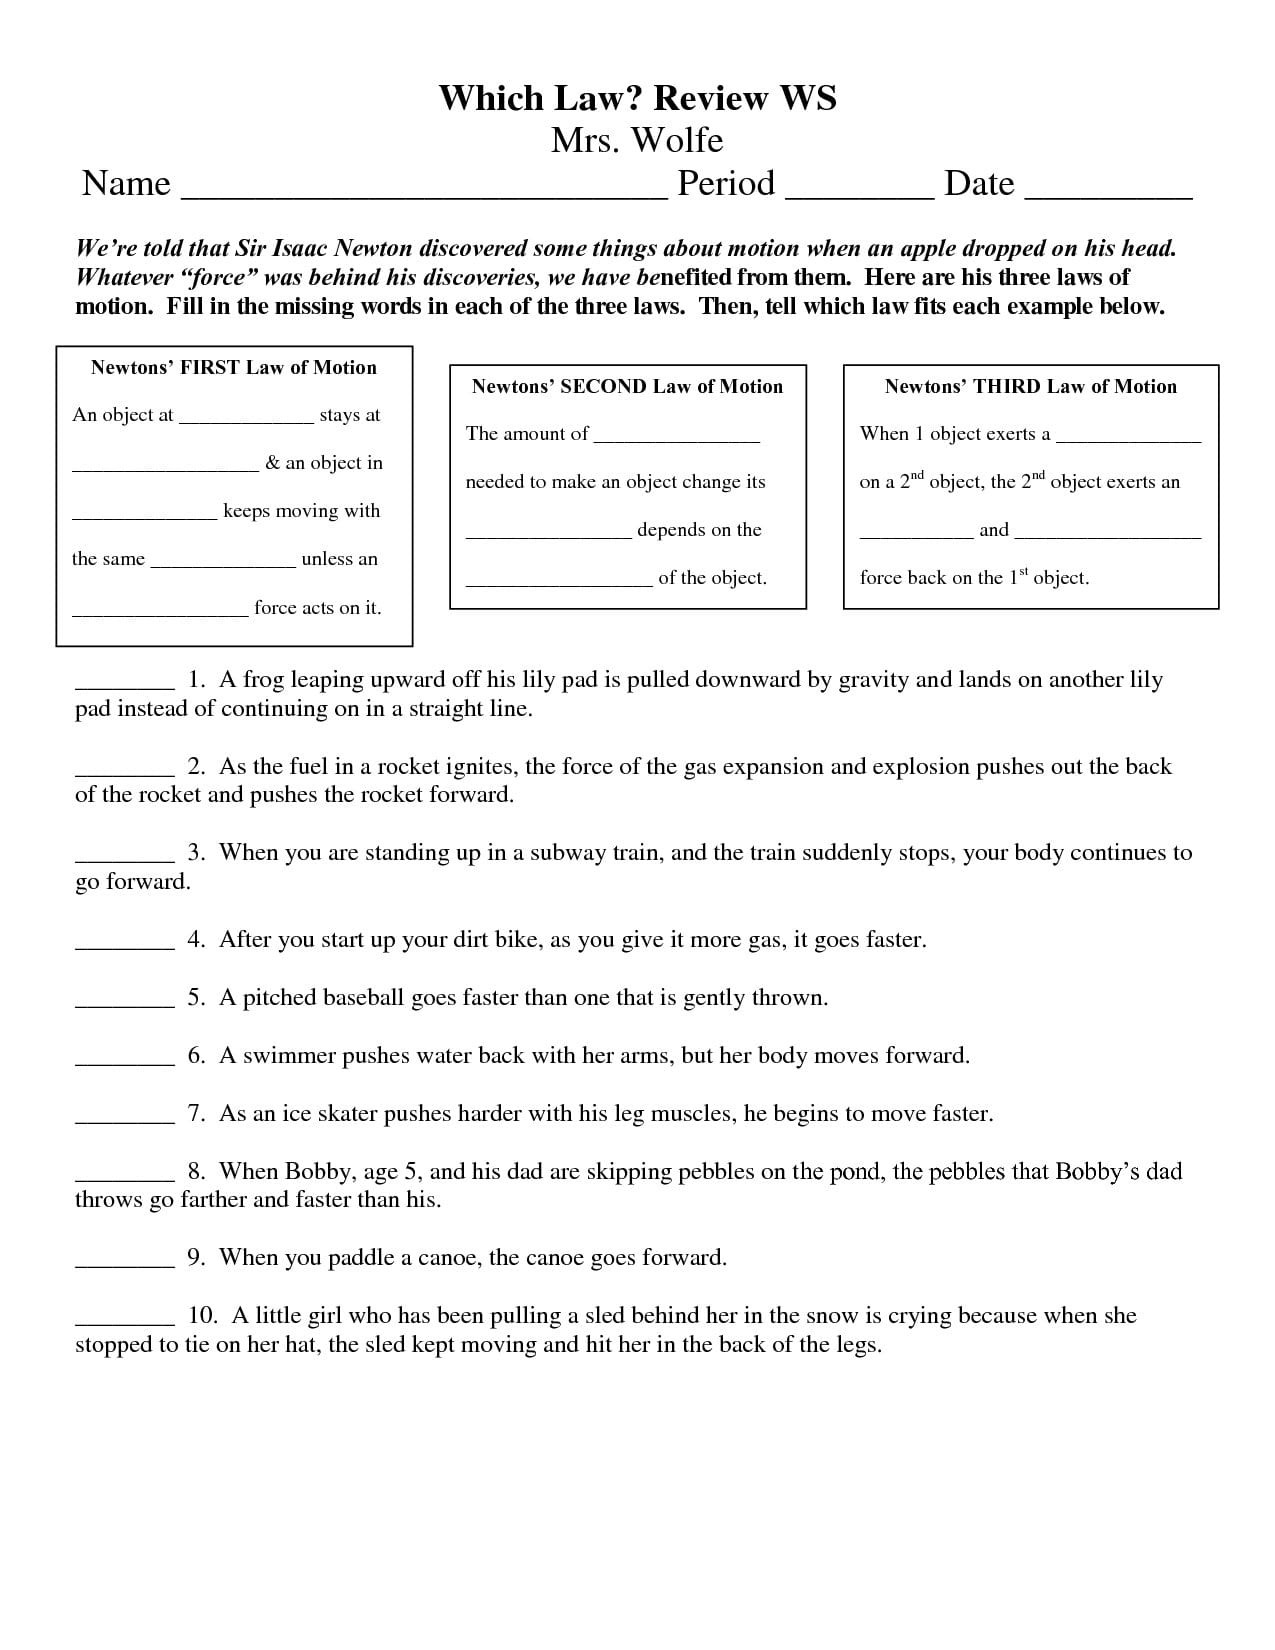 3 laws of motion worksheets newton s third law worksheet laws of regarding isaac newton039s 3 laws of motion worksheet